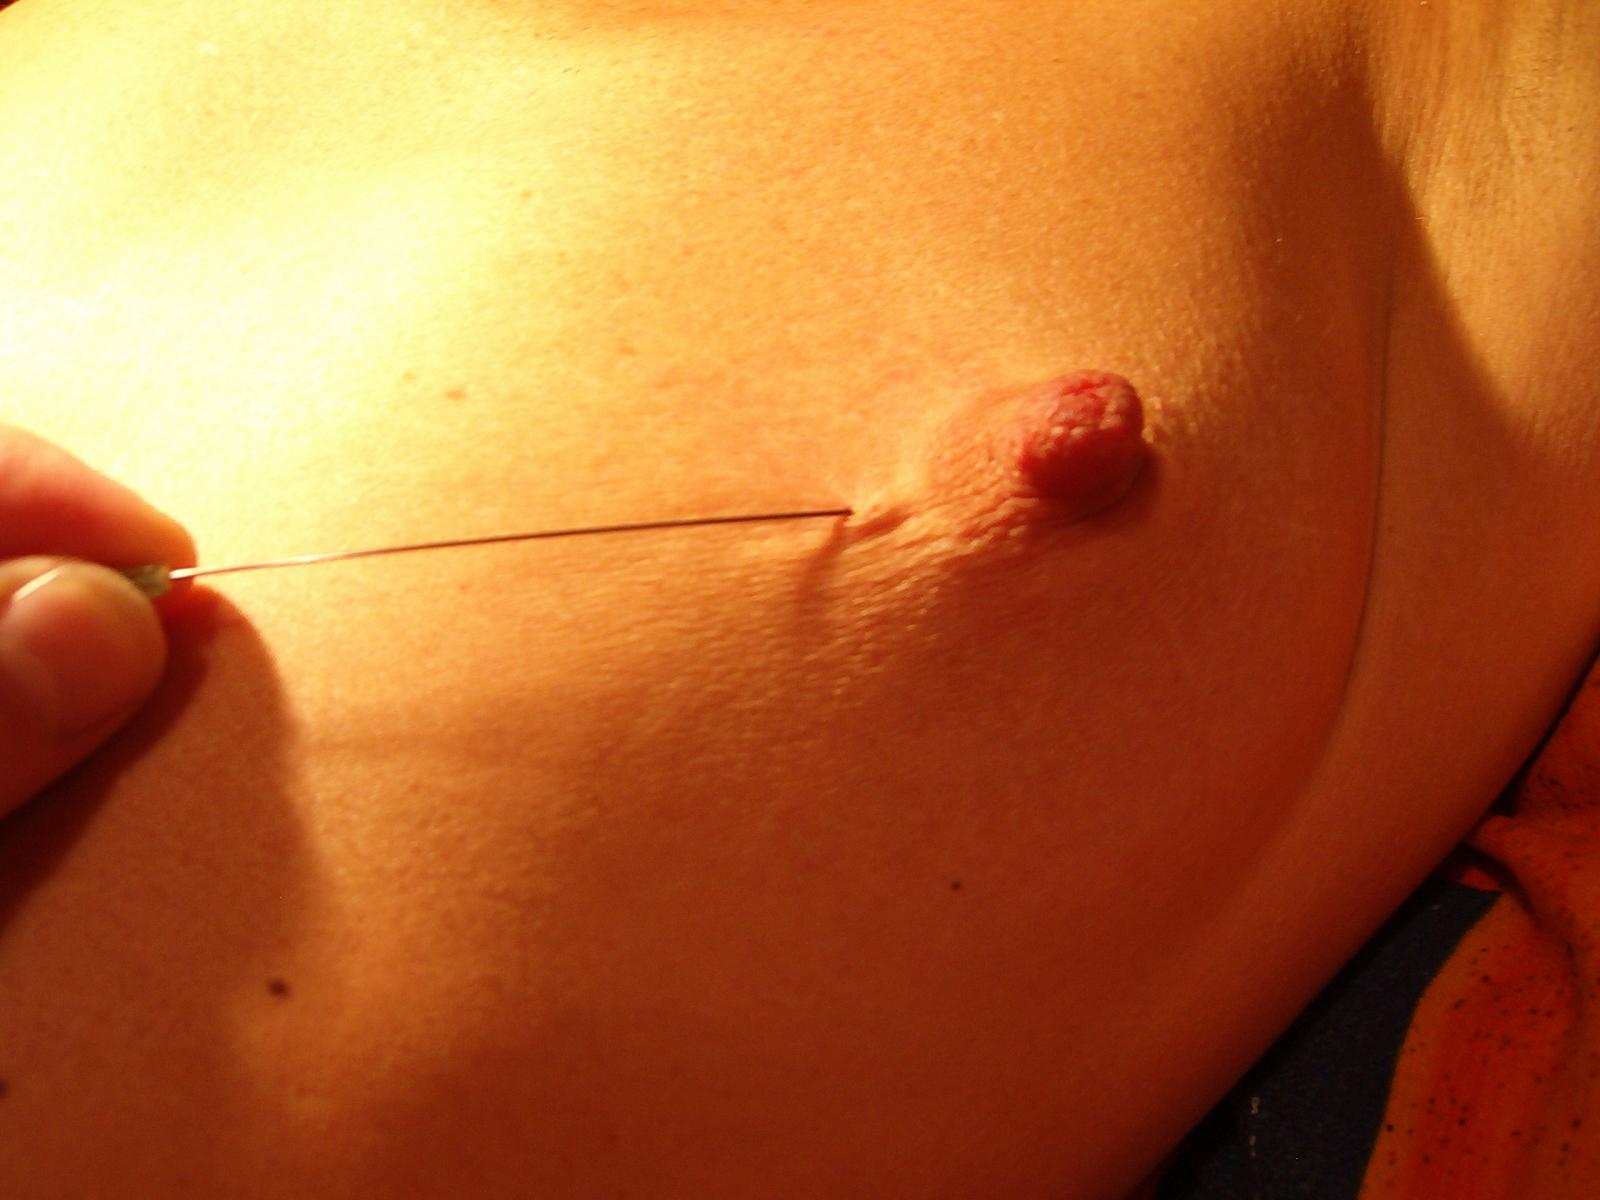 Acupuncture needle testicle with cumshot